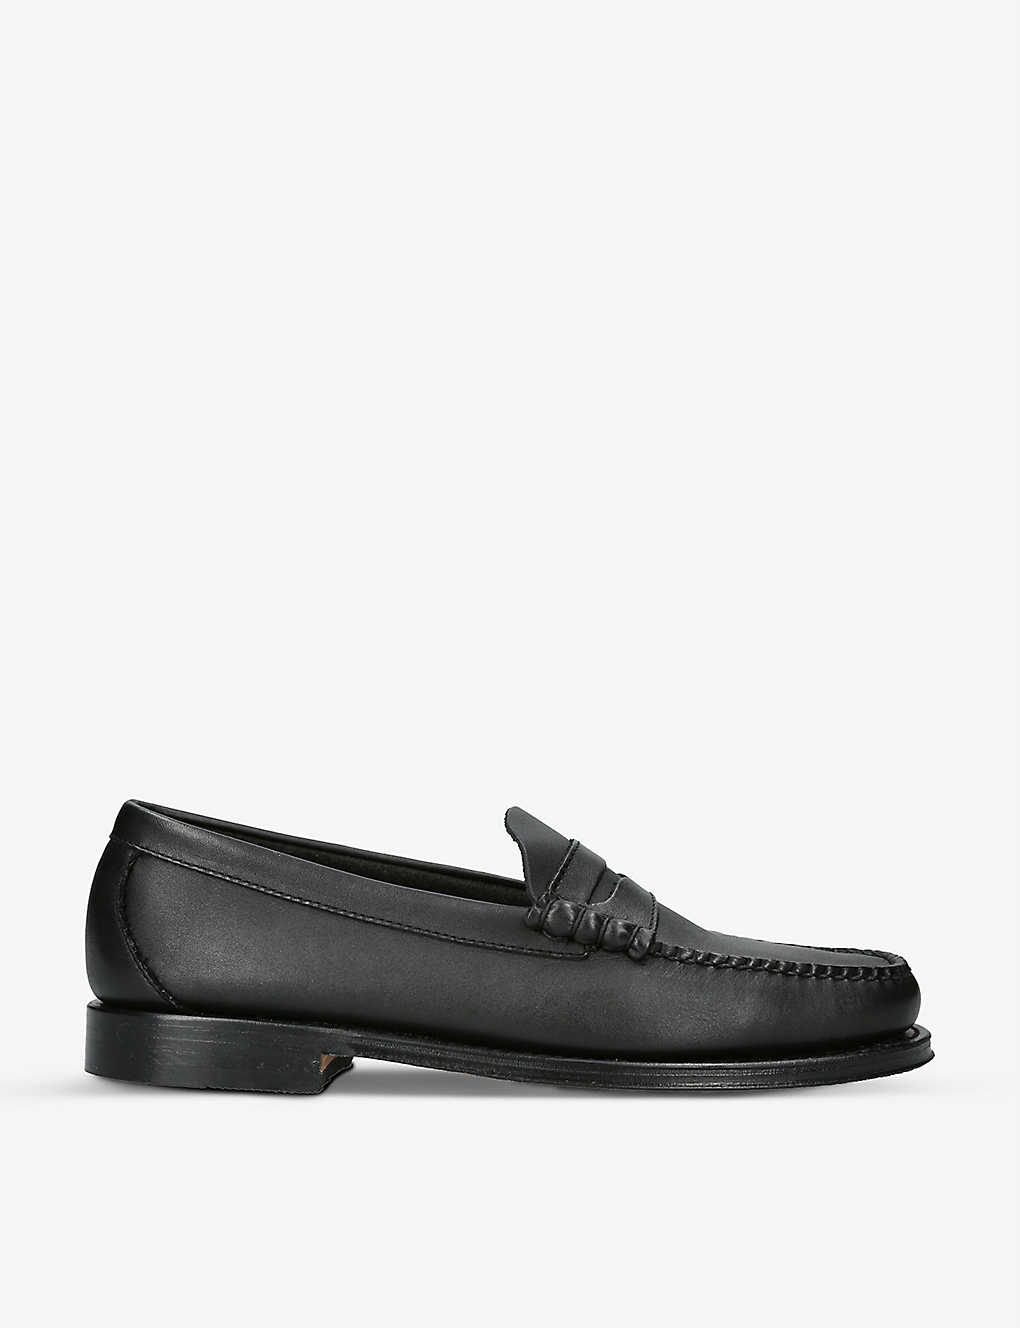 Bass Weejuns Mens Black Larson Soft-leather Penny Loafers